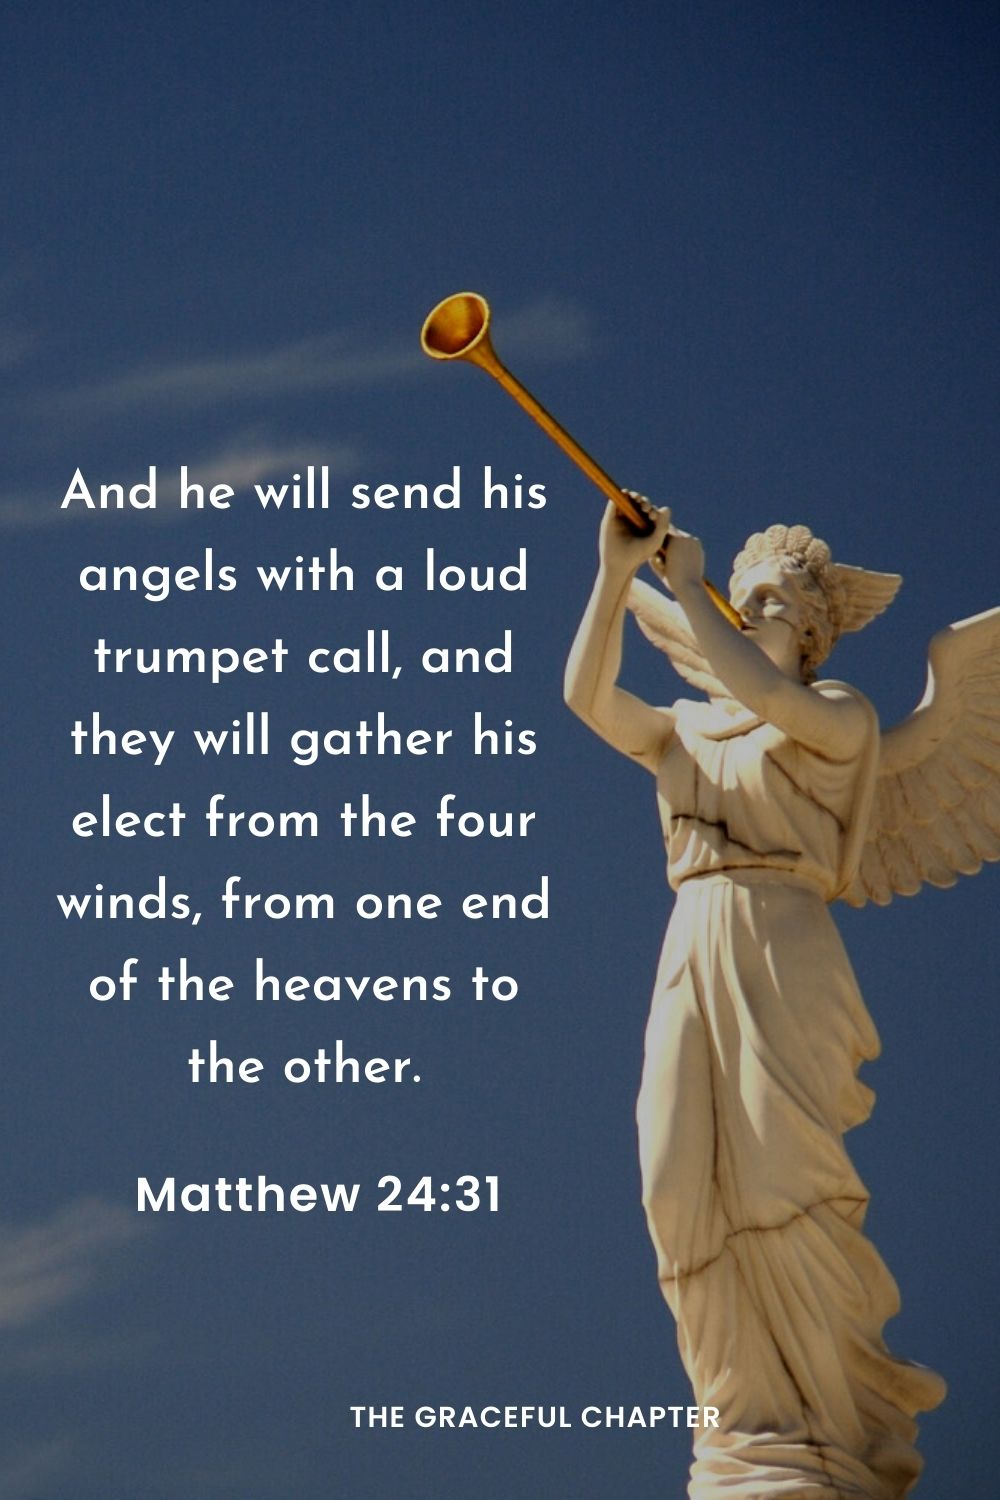 And he will send his angels with a loud trumpet call, and they will gather his elect from the four winds, from one end of the heavens to the other.